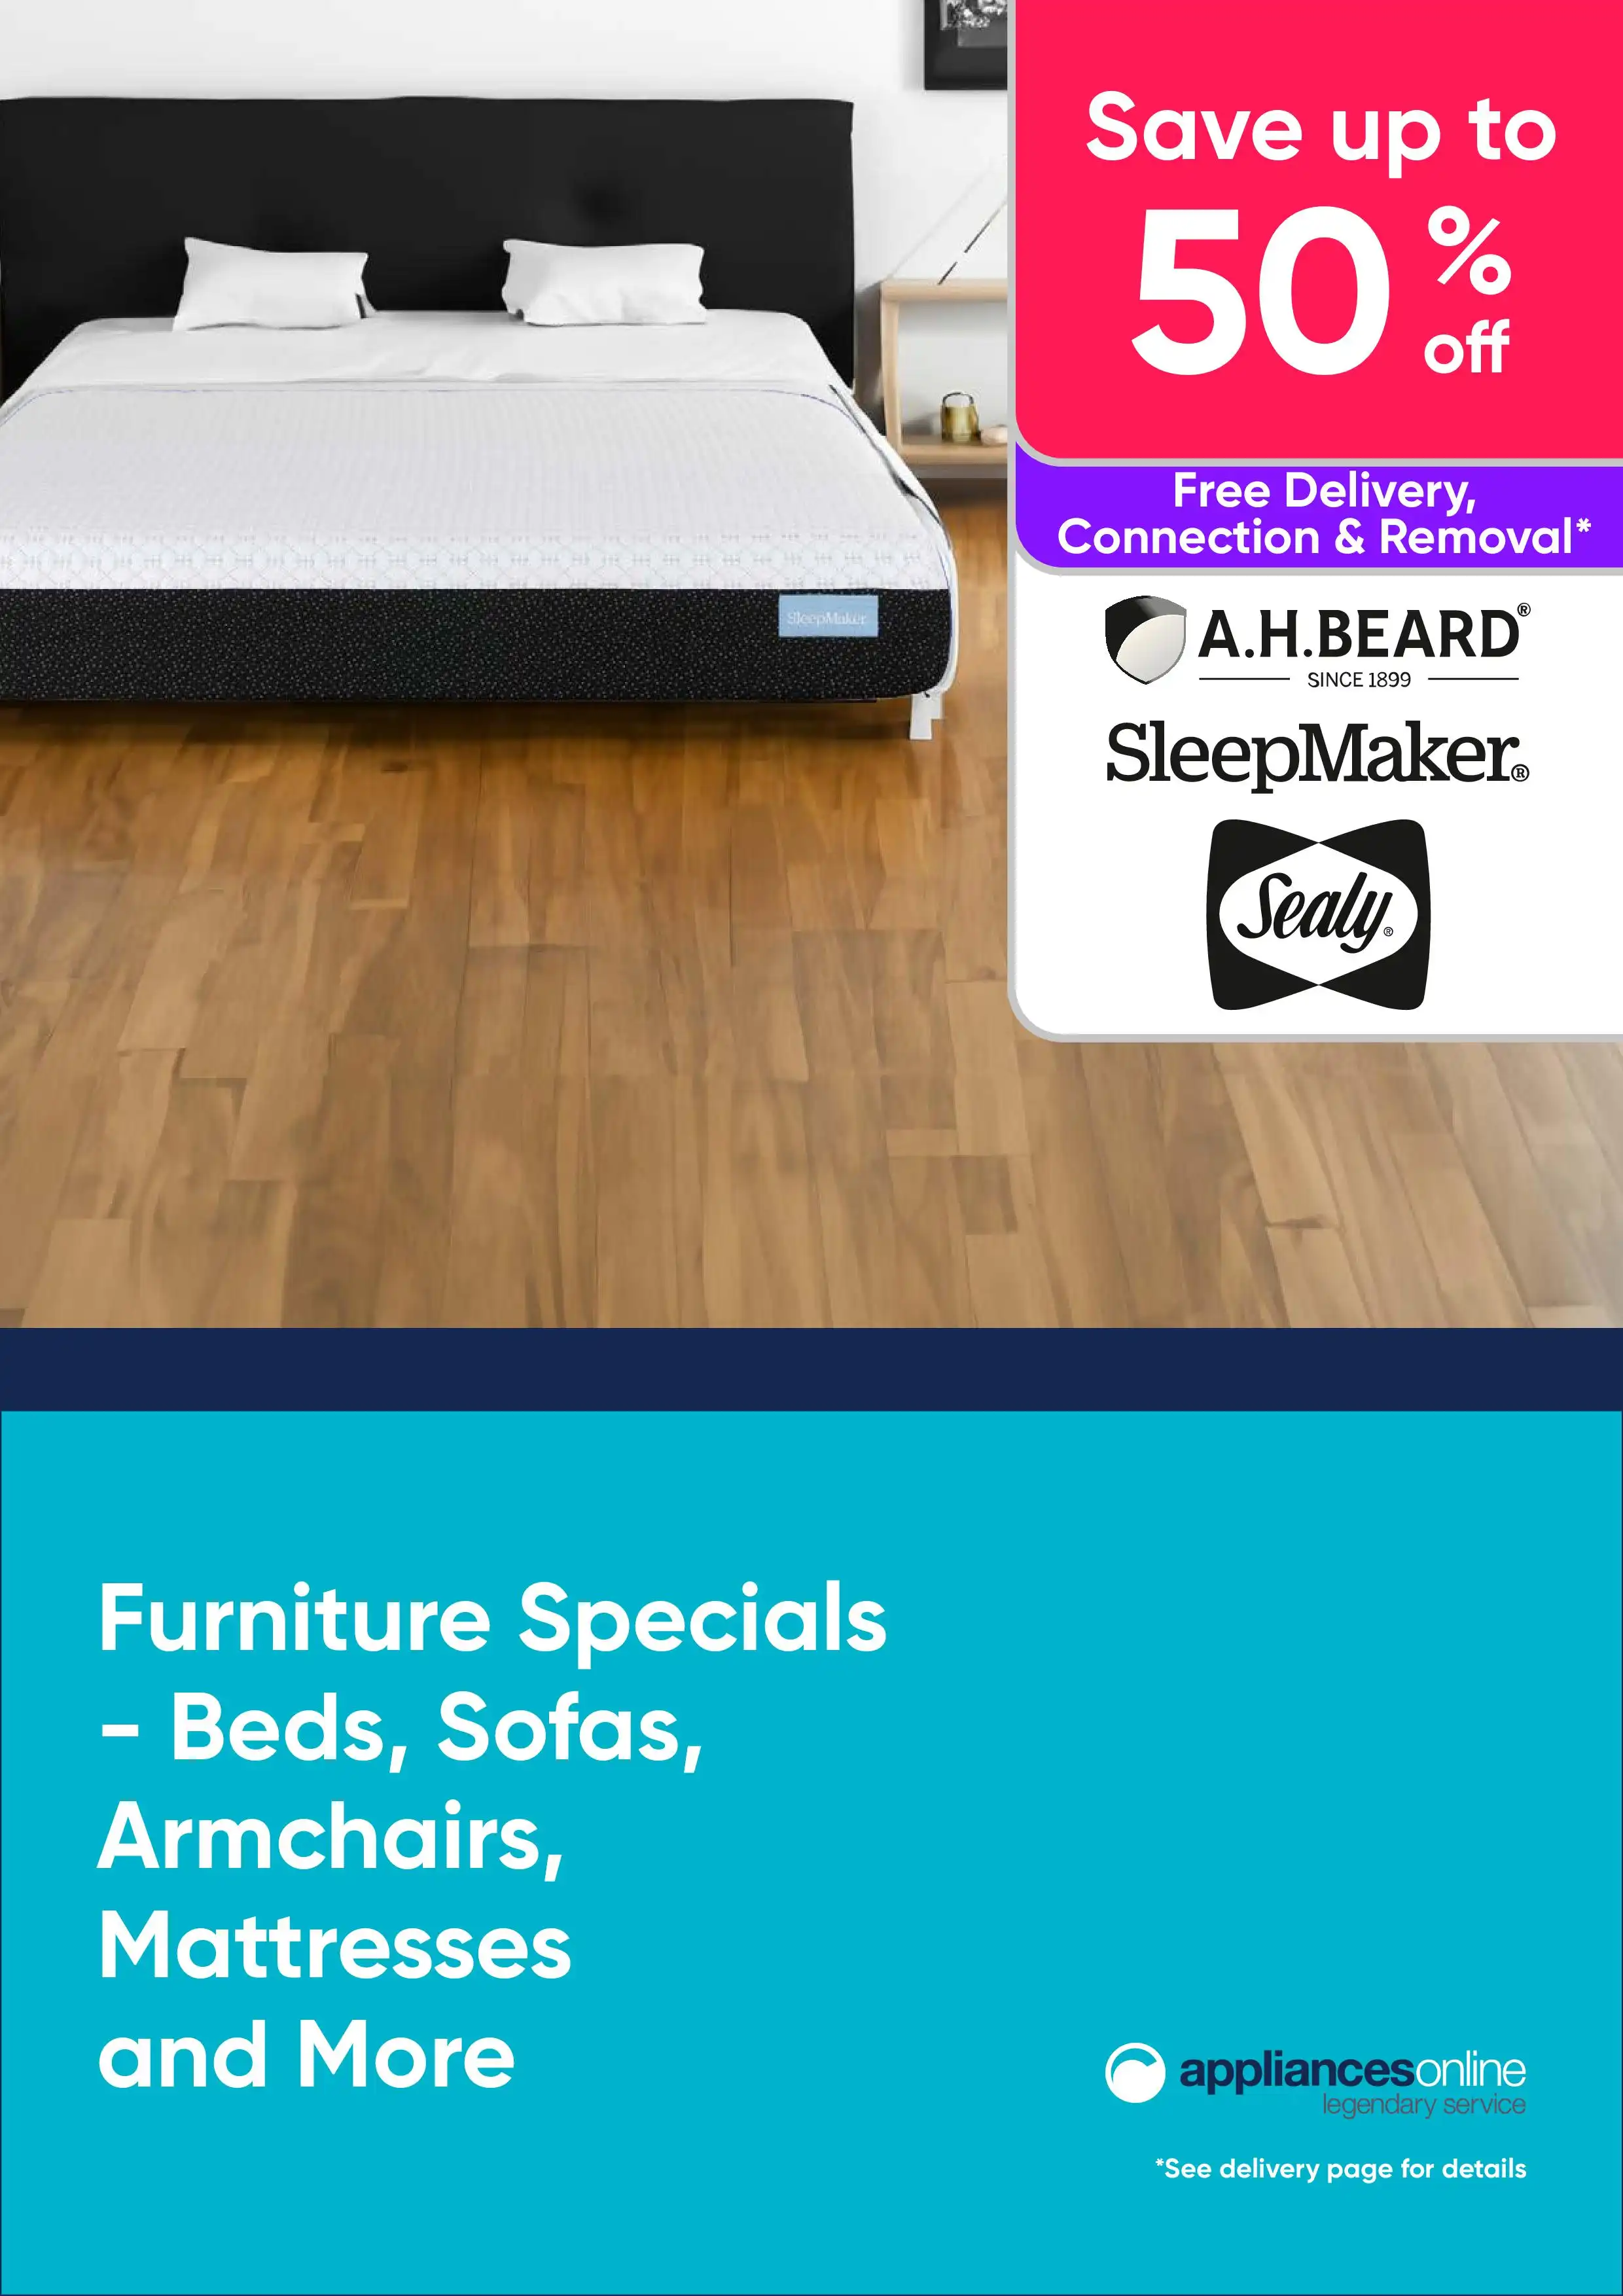 Appliances Online Furniture Specials- Save Up to 50% RRP On Beds, Sofas, Mattresses and More